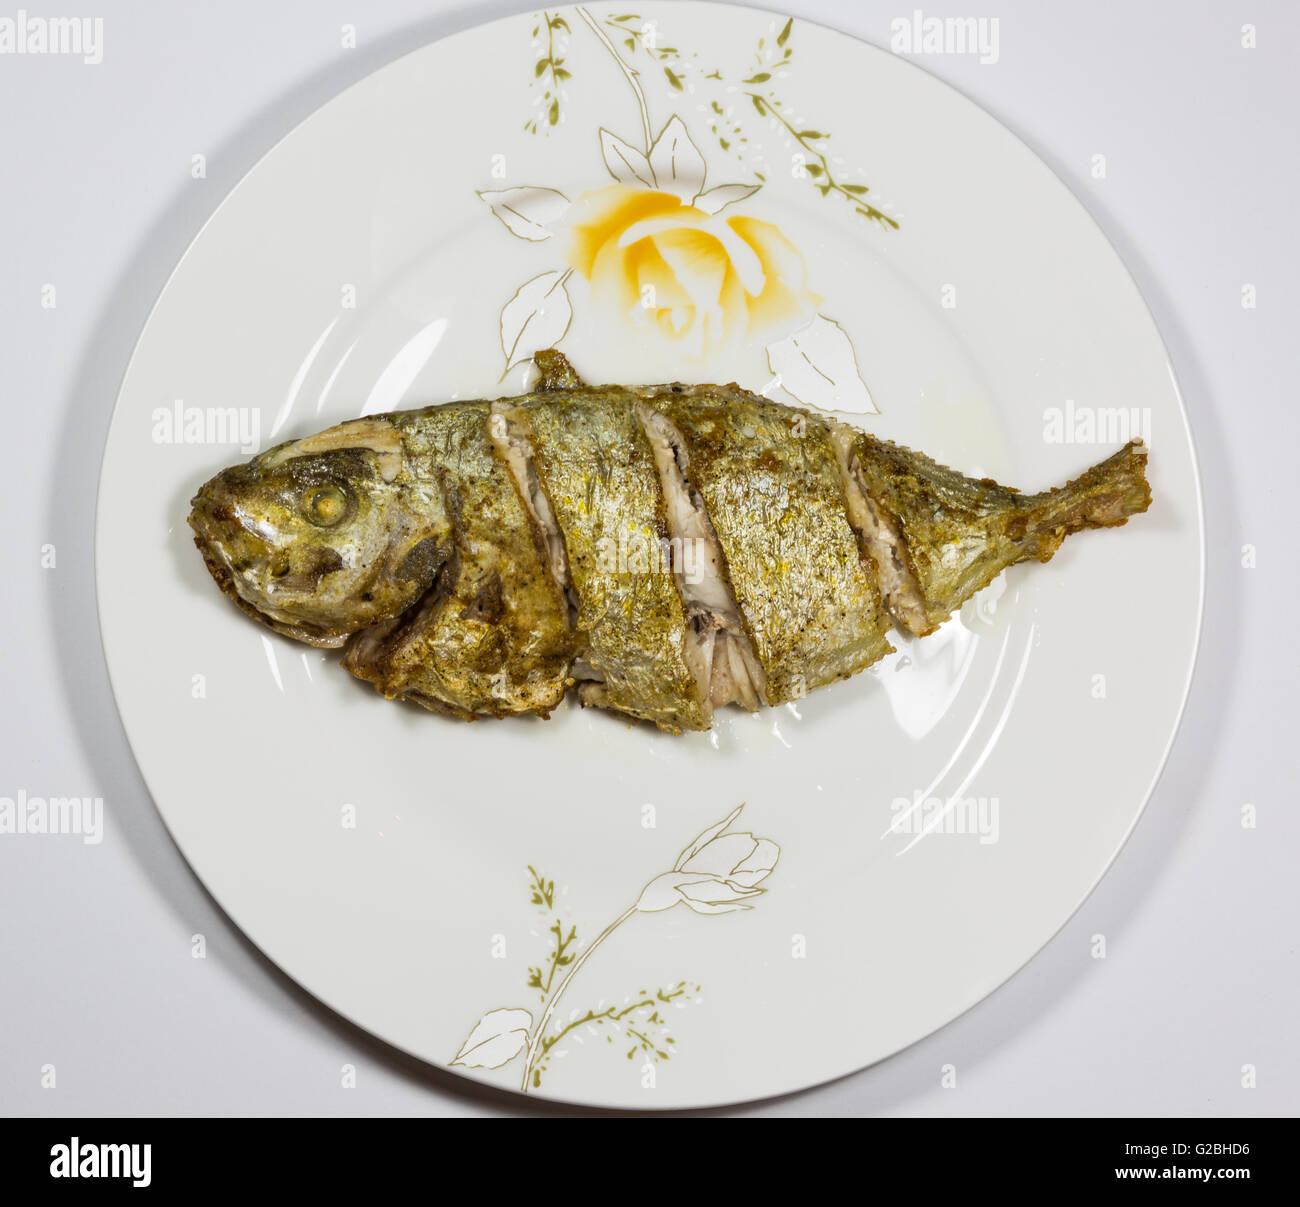 Fried fish on the plate Stock Photo